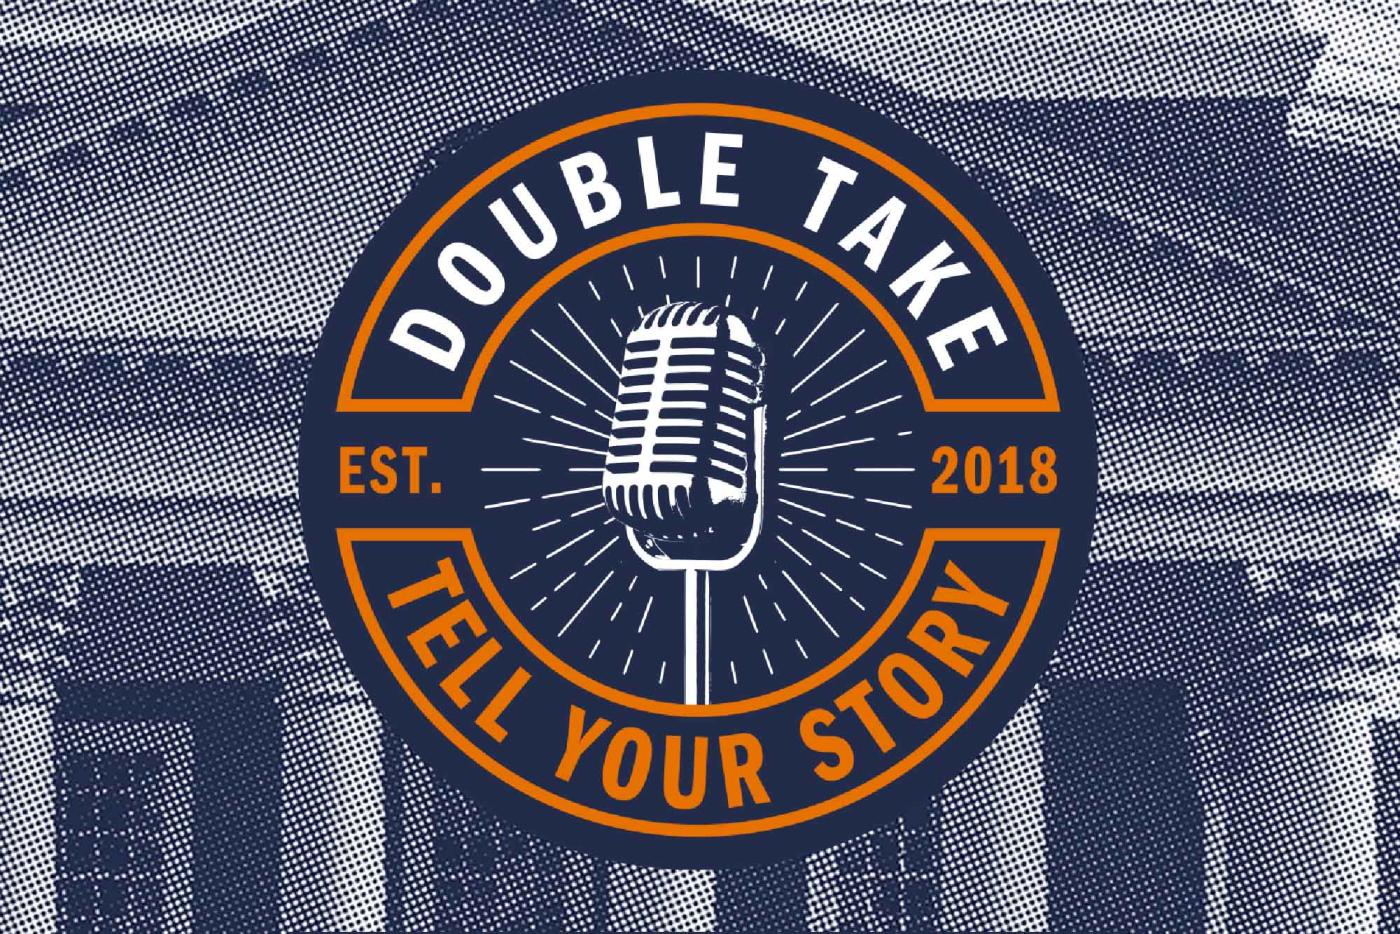 Circular logo reading "Double Take", "Tell Your Story" and "Est. 2018"